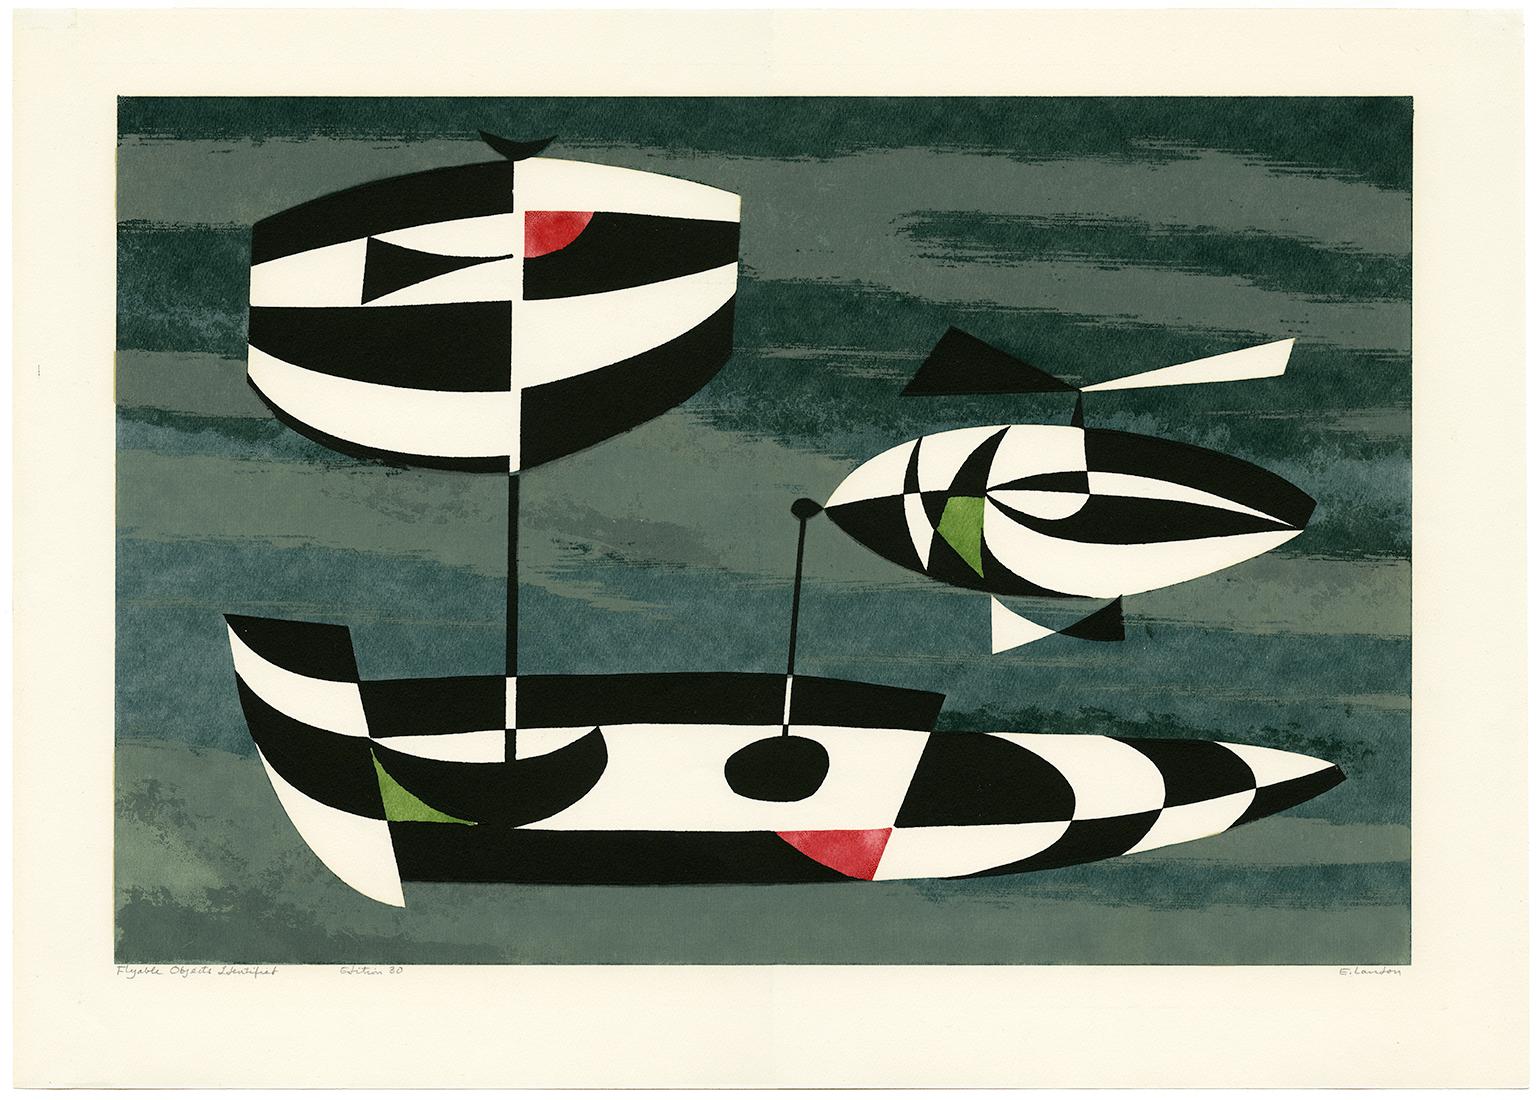 'Flyable Objects Identified' —Mid-Century Modern - Print by Edward August Landon